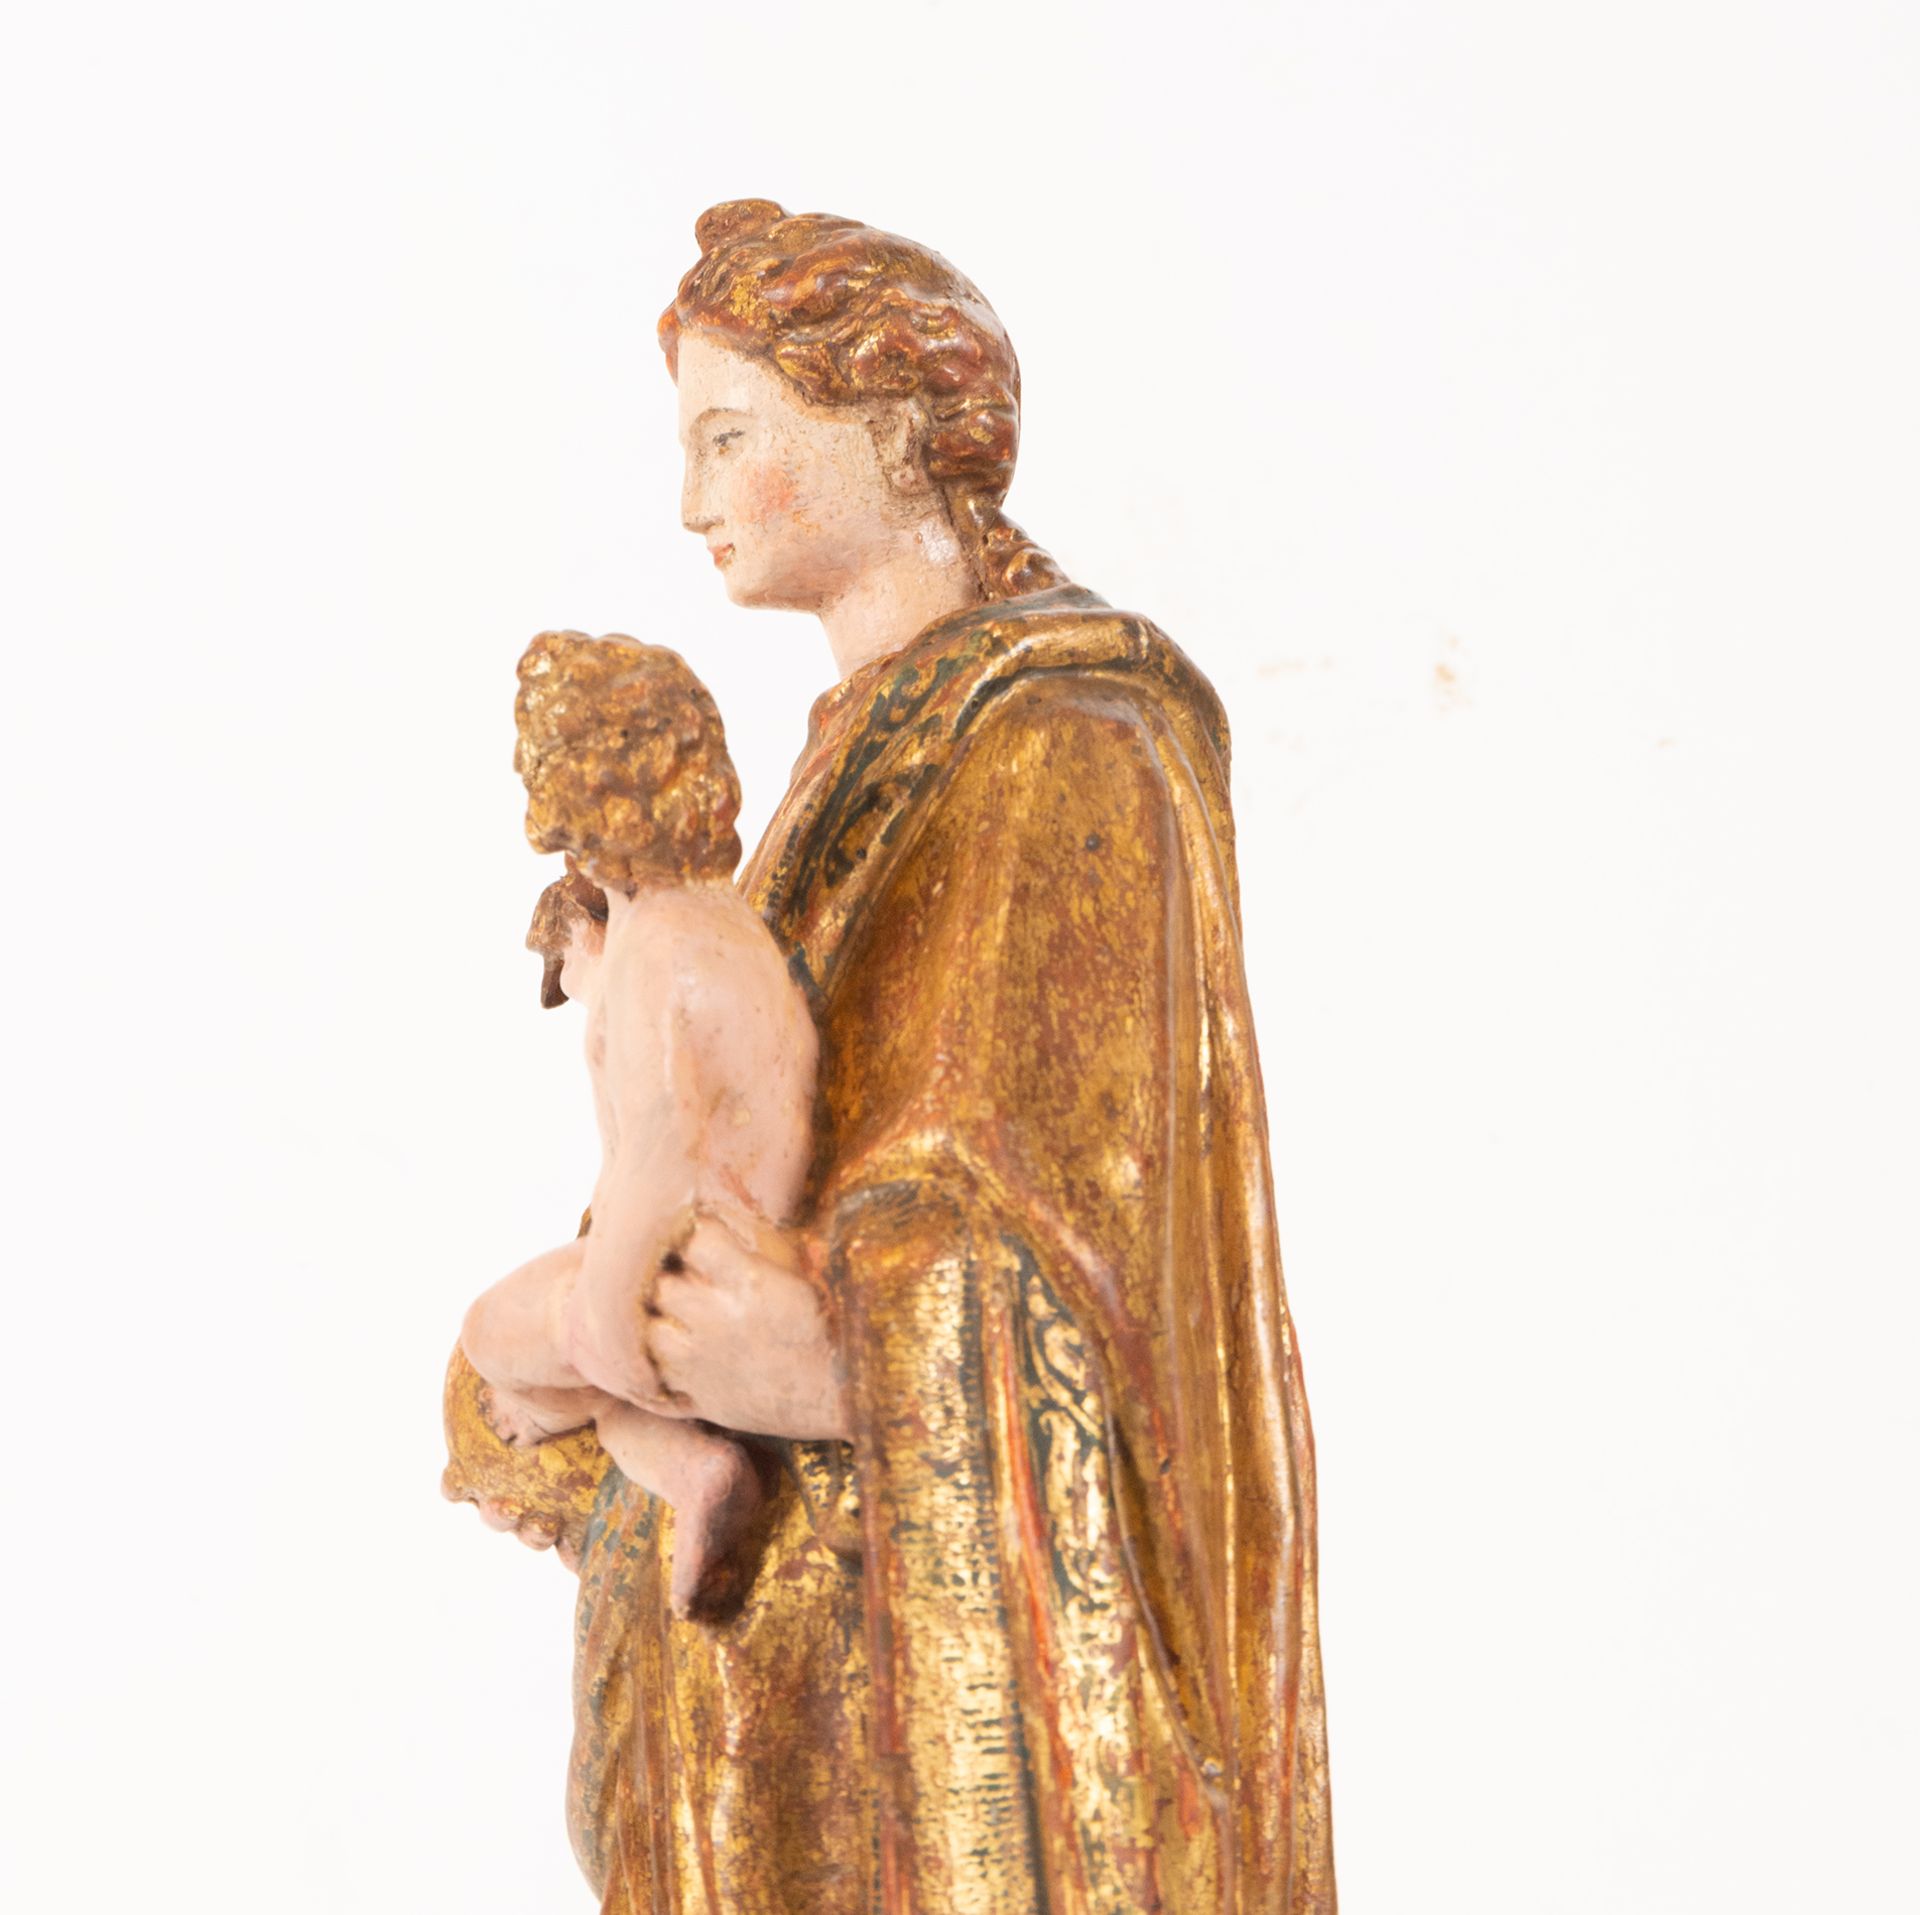 Important Virgin with Child in her arms, Hispano-Flemish school of the 16th century - Image 5 of 11